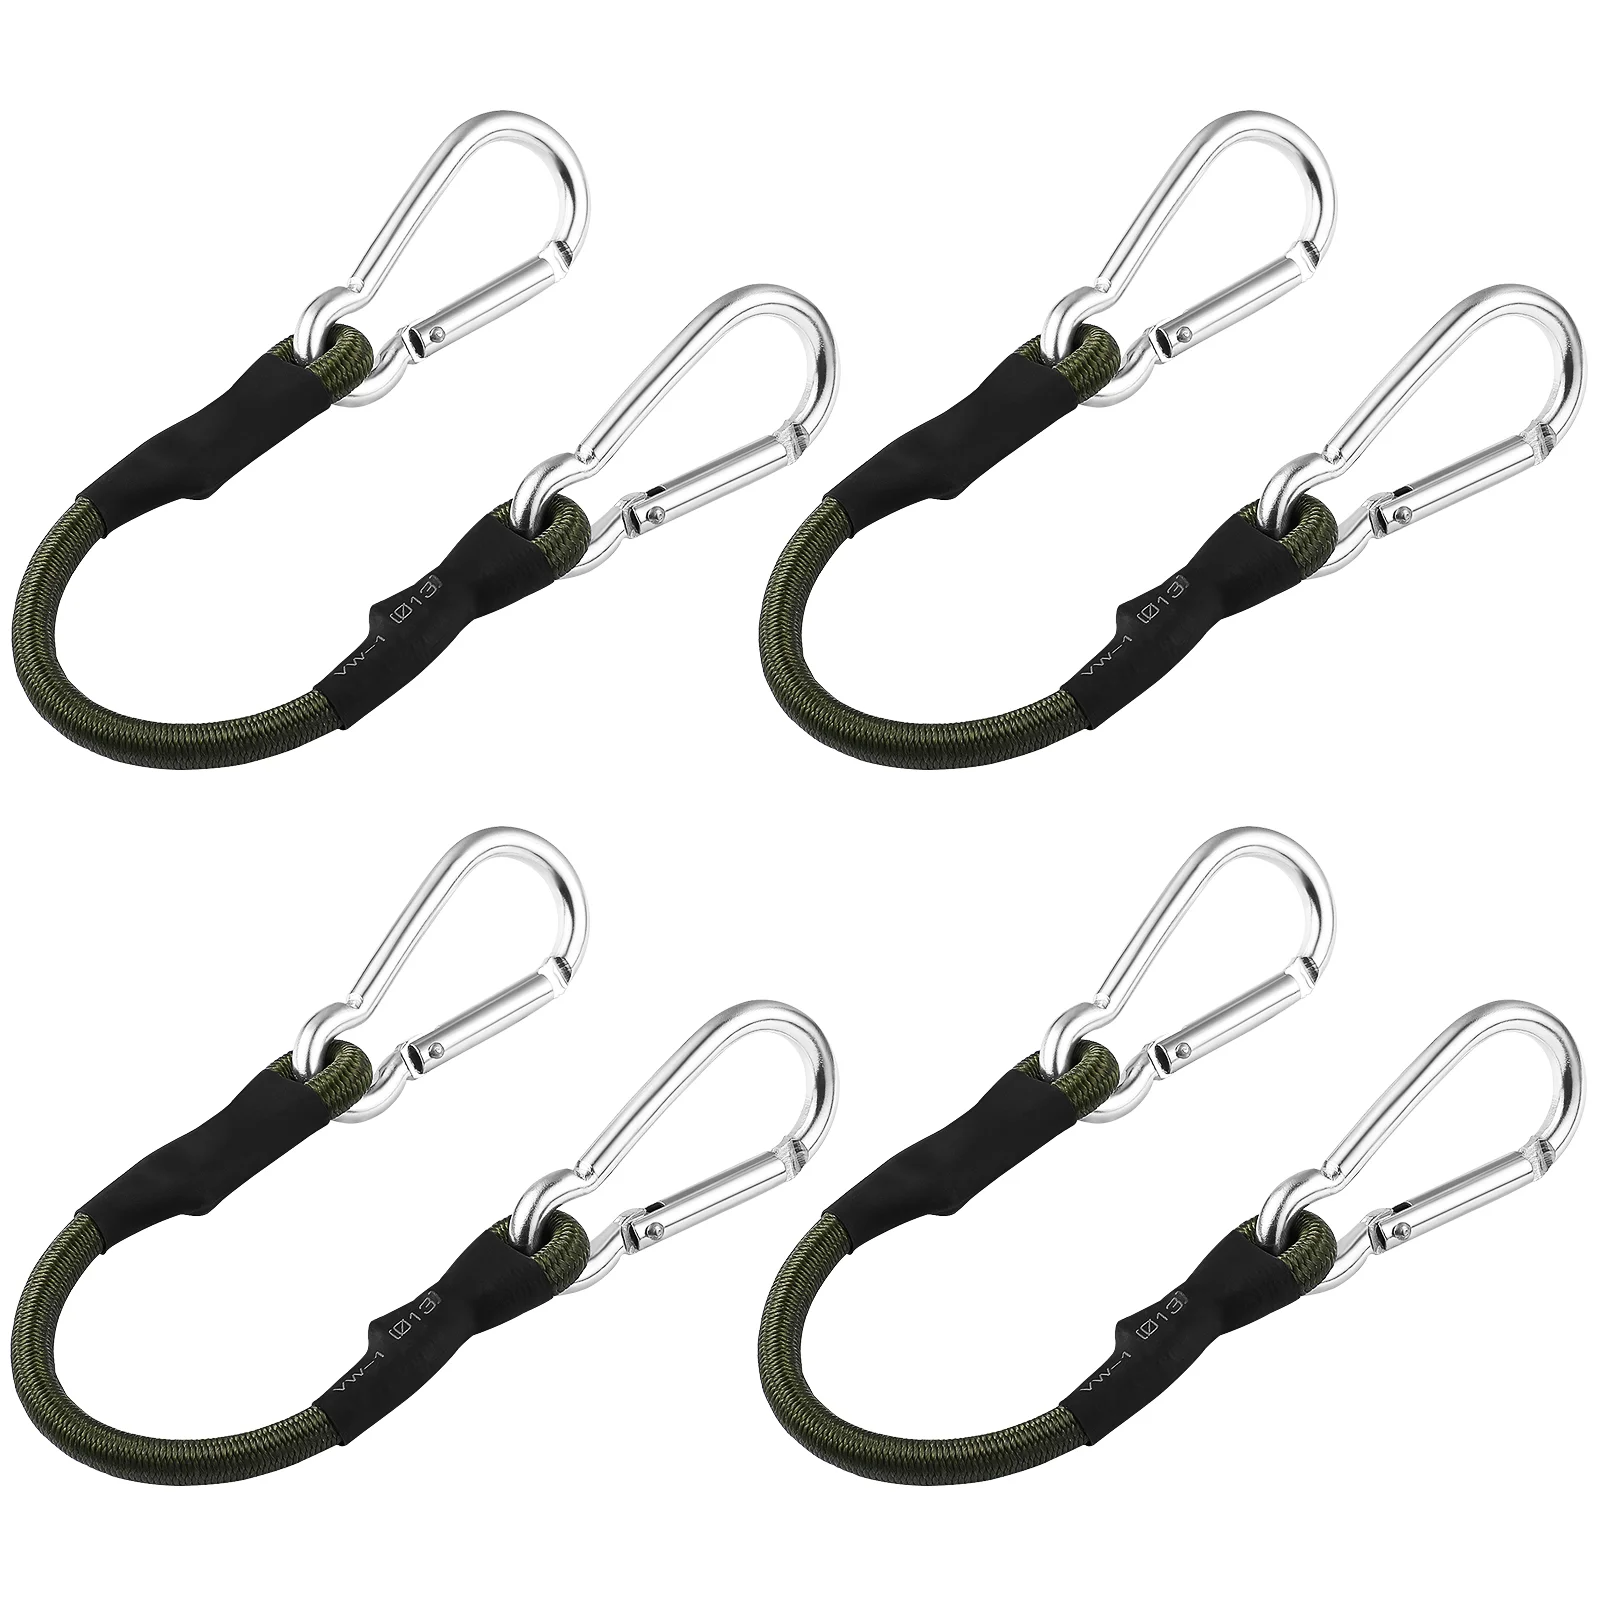 

Bungee Cord Cords Carabiner Straps Outdoor Tie Strap Elastic Camping Duty Heavy Down Lashing Hook Latex Sports Bungie Luggage